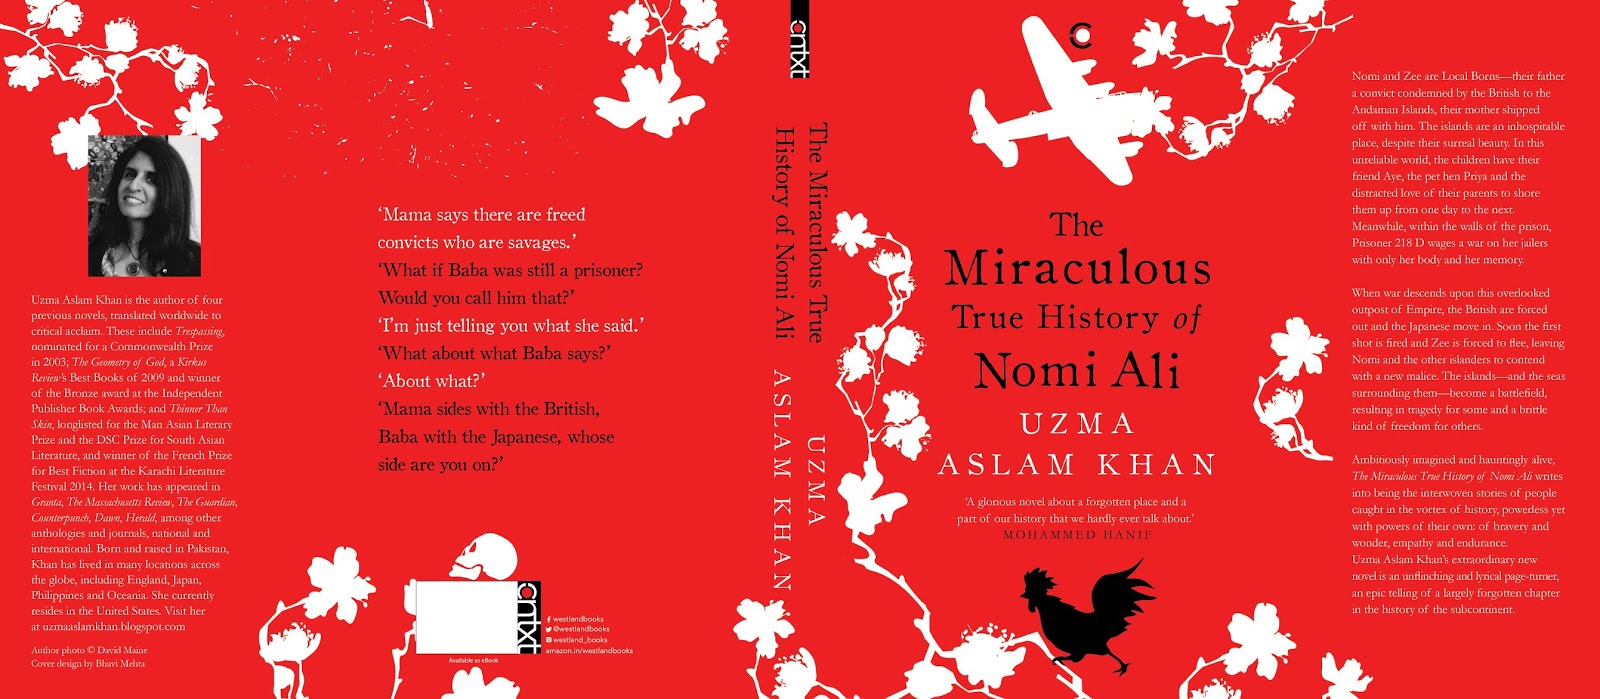 Here's The Full Cover Spread, By The Immensely Gifted - Miraculous True History Of Nomi Ali , HD Wallpaper & Backgrounds